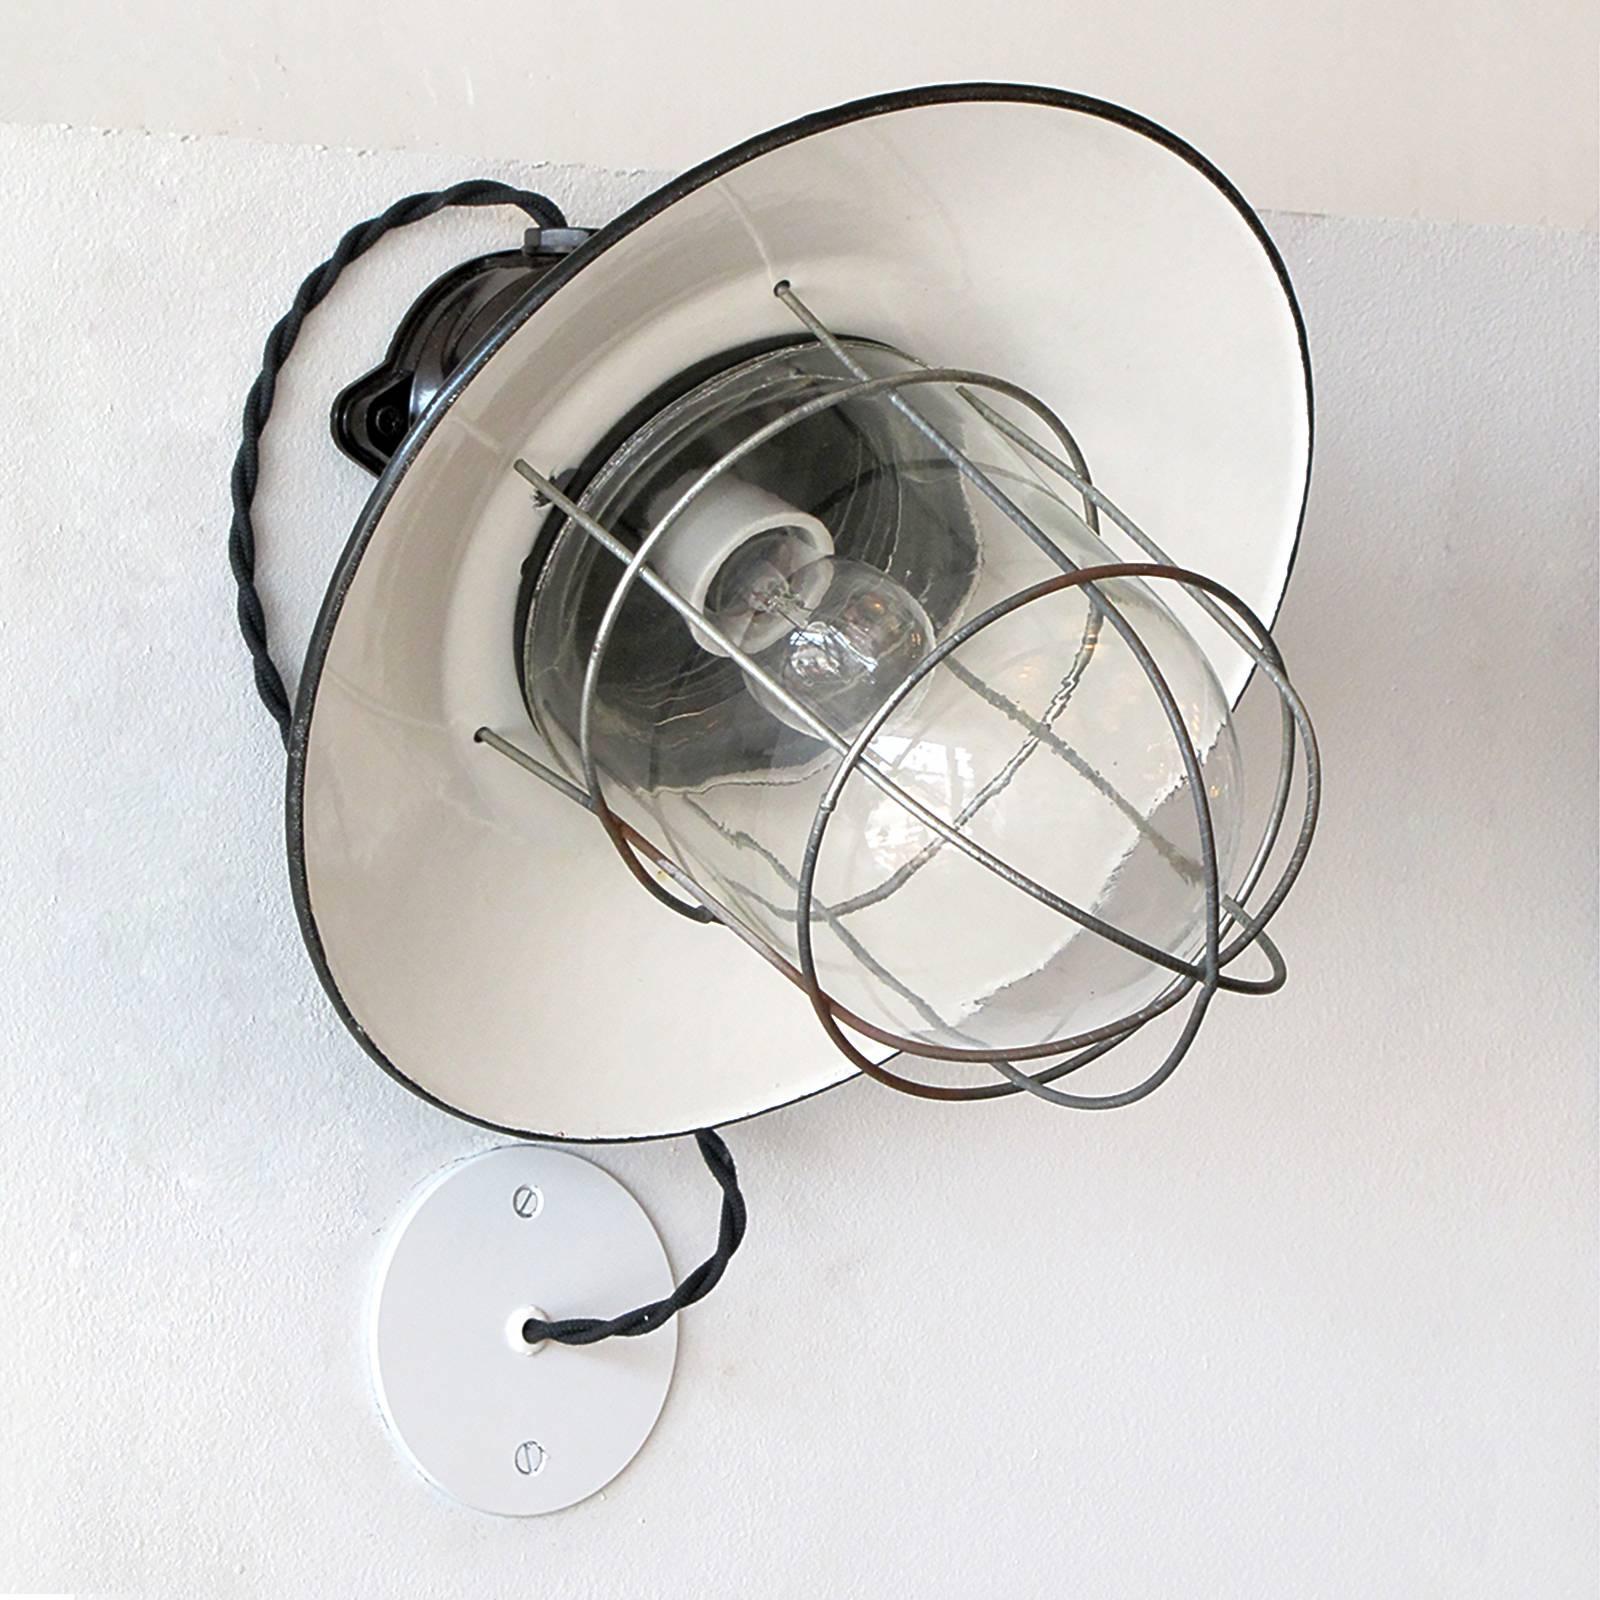 Great pair of German Industrial wall lights with bakelite housings, enameled metal shades and a metal cages enveloping glass domes, currently wired with external j-box covers.